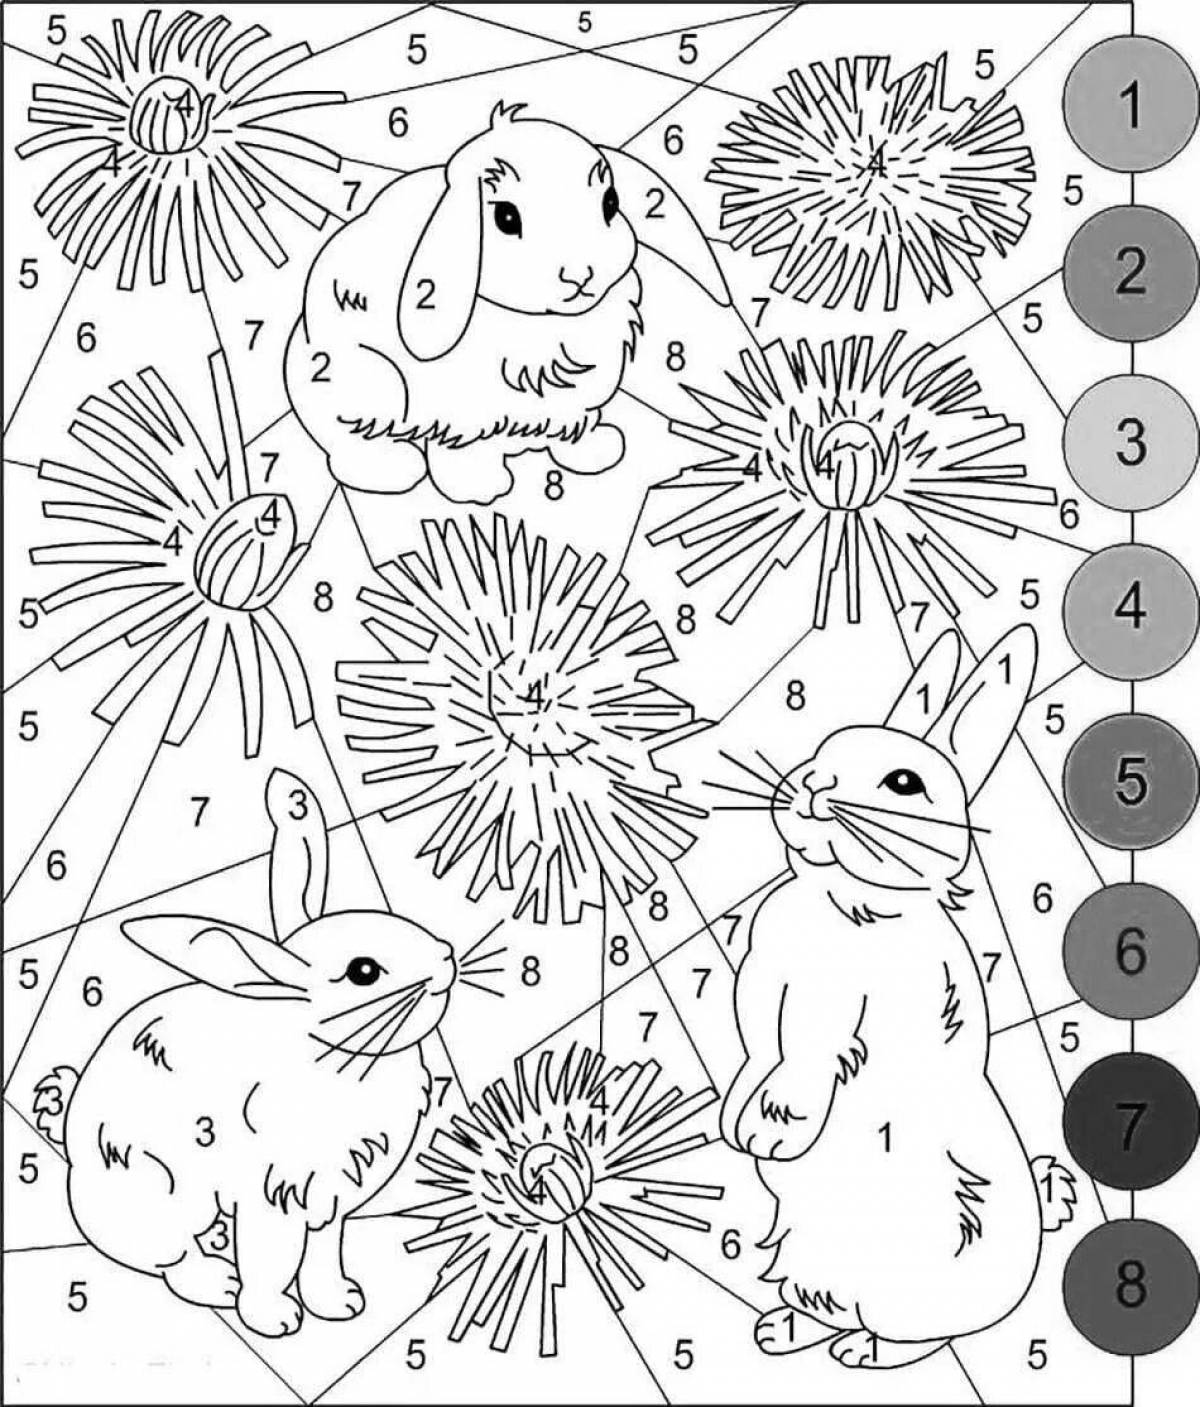 Easy-by-numbers coloring book